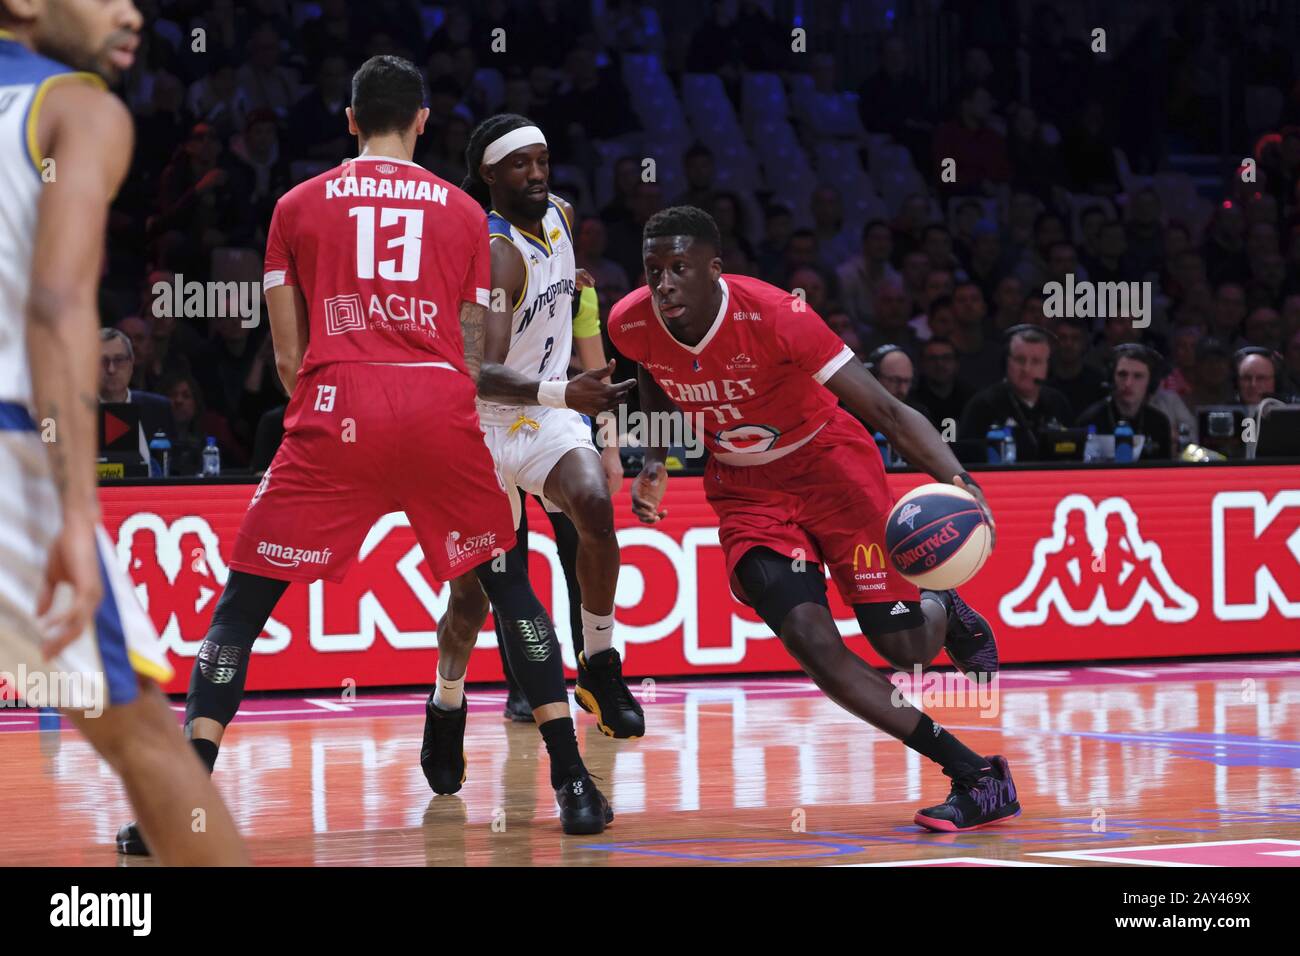 Marne La Vallee, Seine et Marne, France. 14th Feb, 2020. Cholet player  NDOYE ABDOULAYE in action during the LNB Basket Leaders Cup quarterfinal  Boulogne against Cholet at the Disney Events Arena in